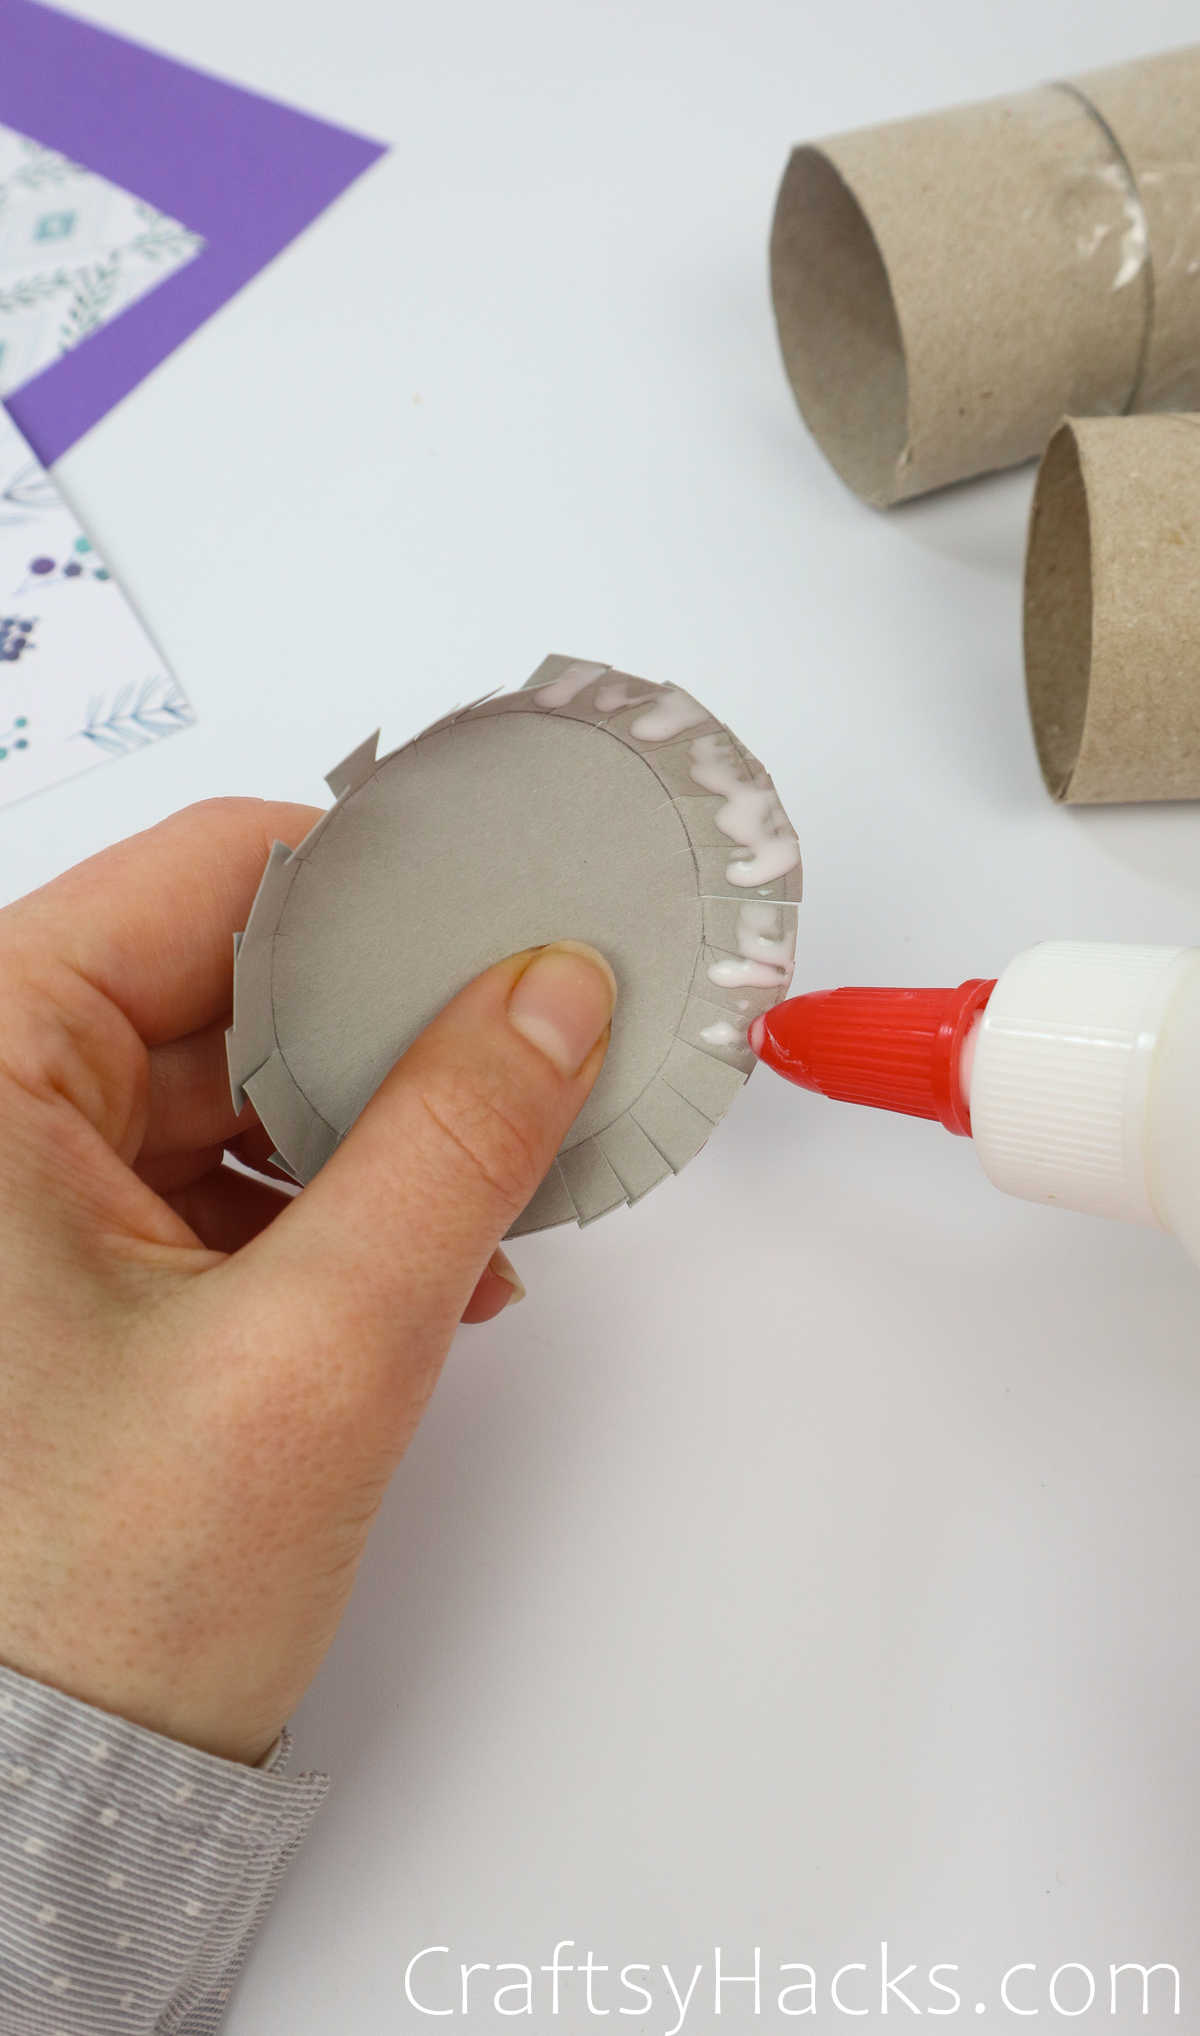 glue circumference and press flaps together